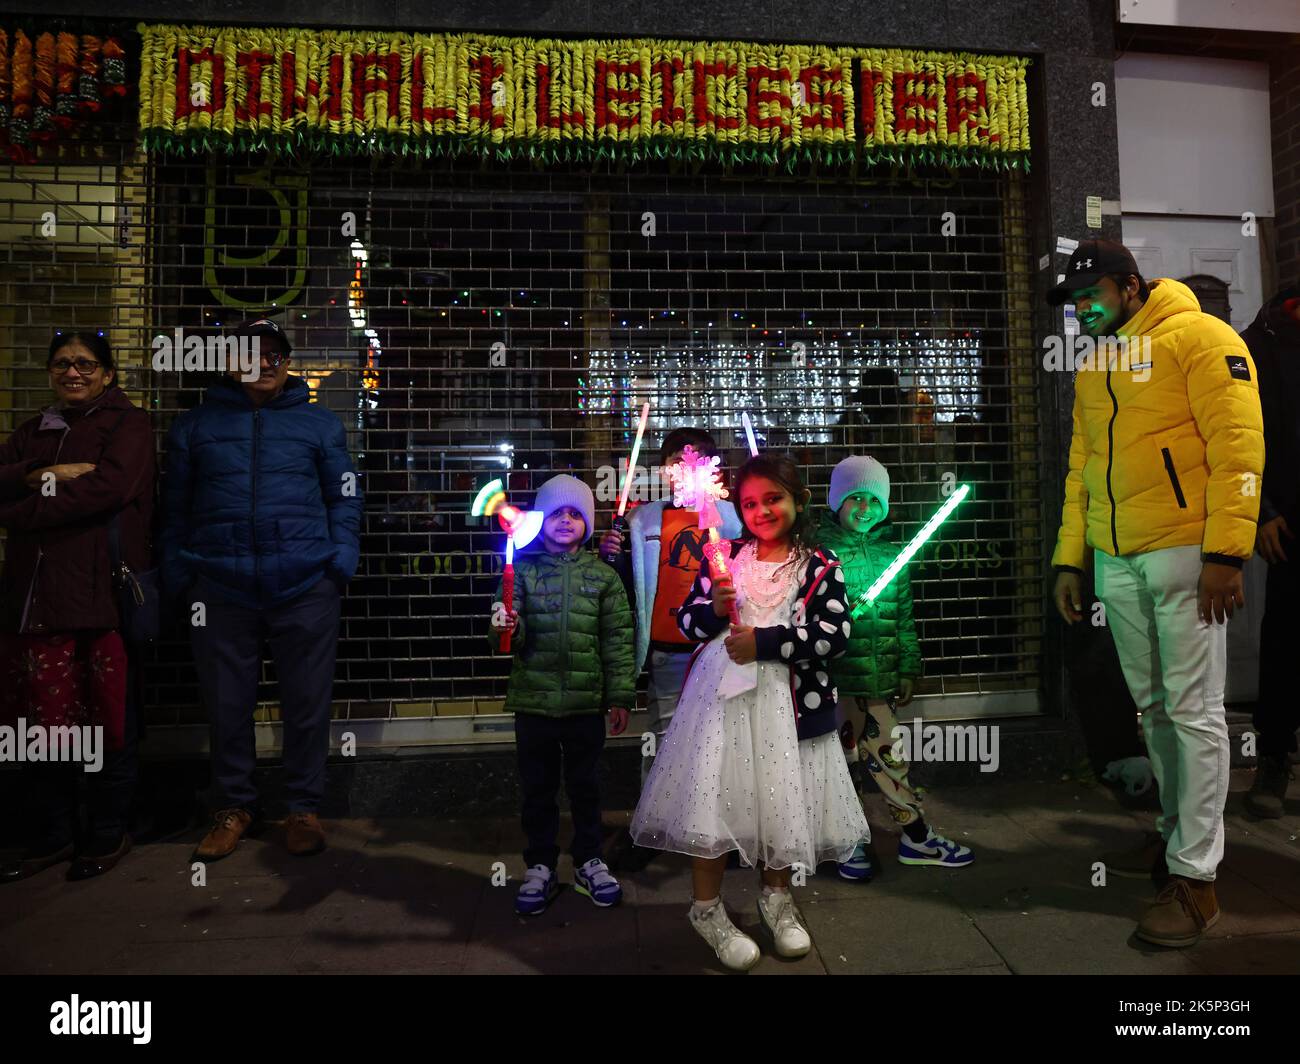 Leicester, Leicestershire, UK. 9th October 2022. People attend the Diwali Lights annual switch on event on the Golden Mile. LeicesterÔs celebration of Diwali is one of the biggest outside of India. Credit Darren Staples/Alamy Live News. Stock Photo